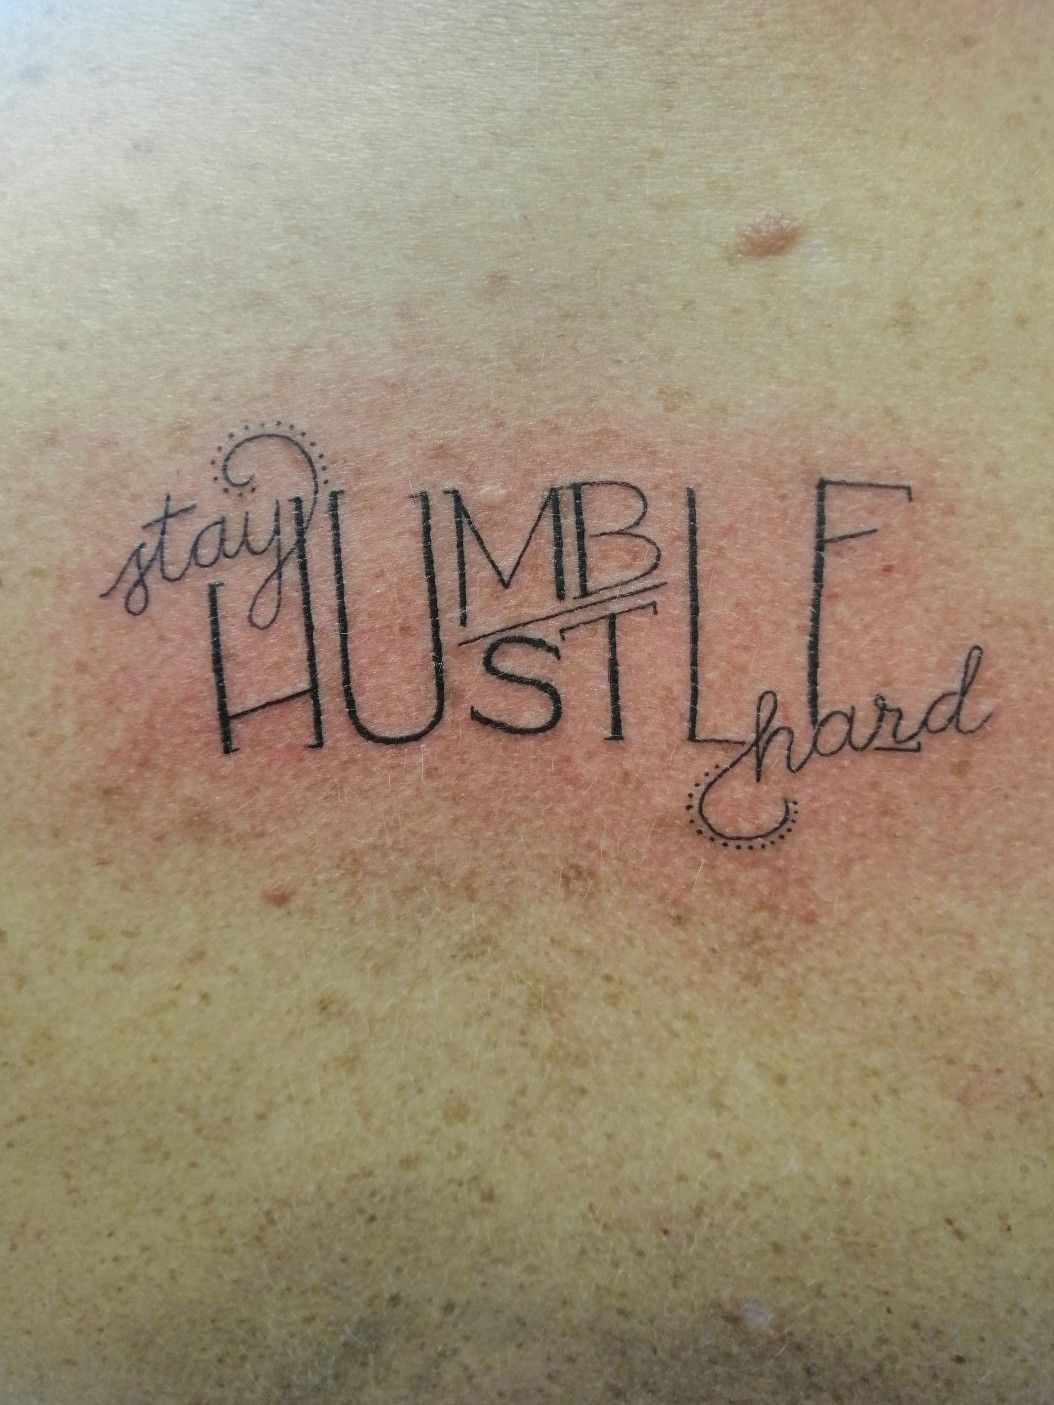 Stay Humble Hustle Hard thats his  Tattoos by Tip  Facebook